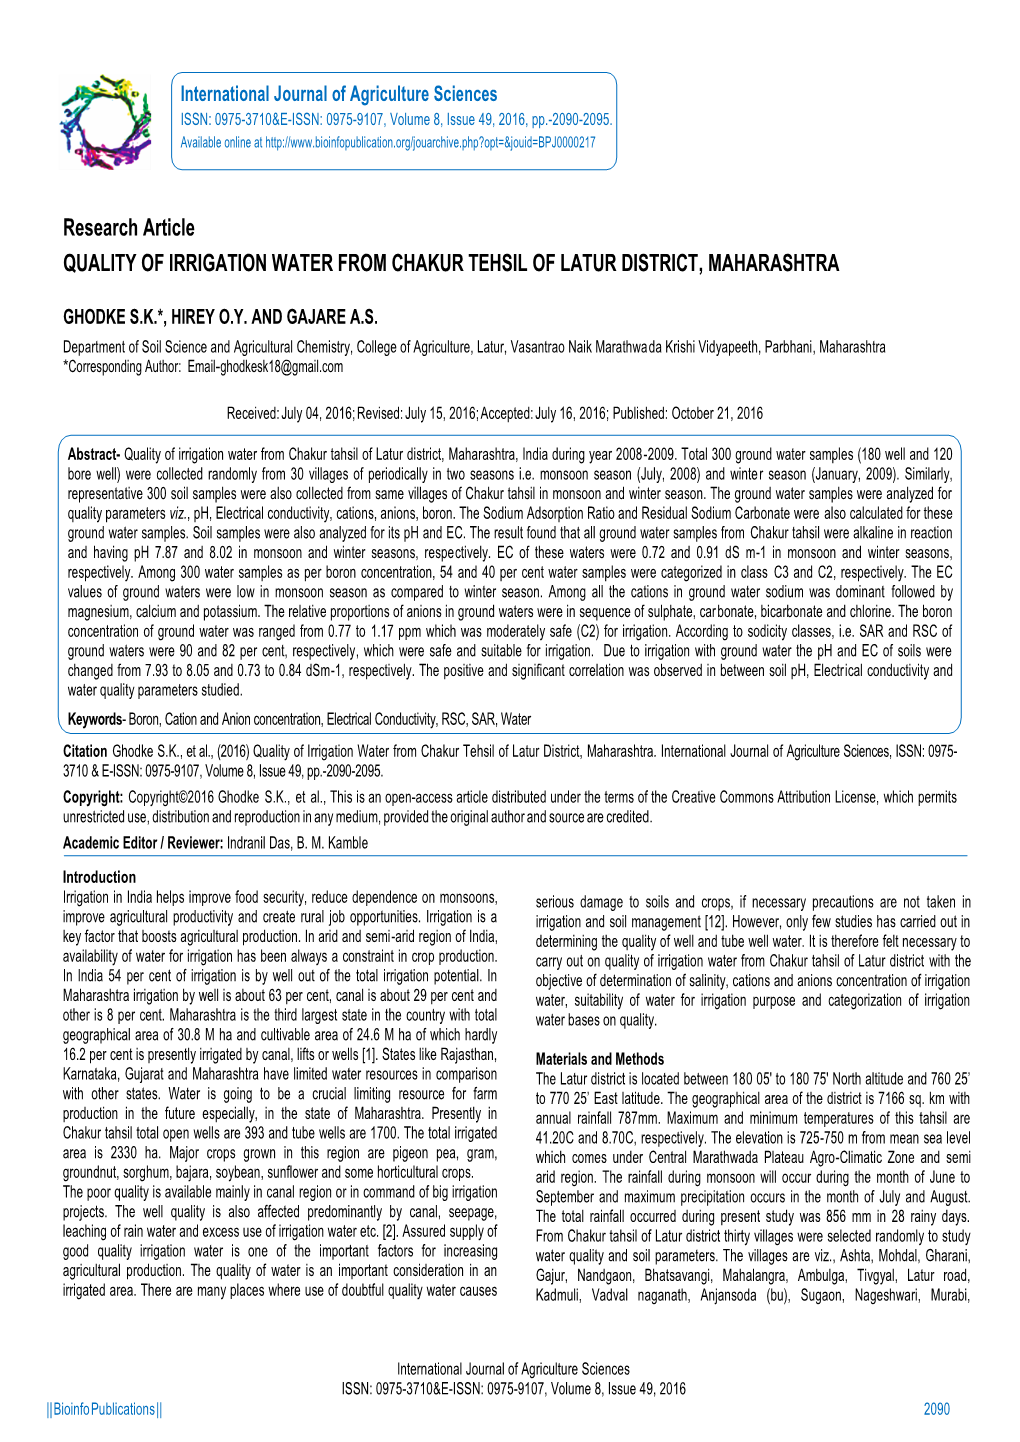 Research Article QUALITY of IRRIGATION WATER from CHAKUR TEHSIL of LATUR DISTRICT, MAHARASHTRA